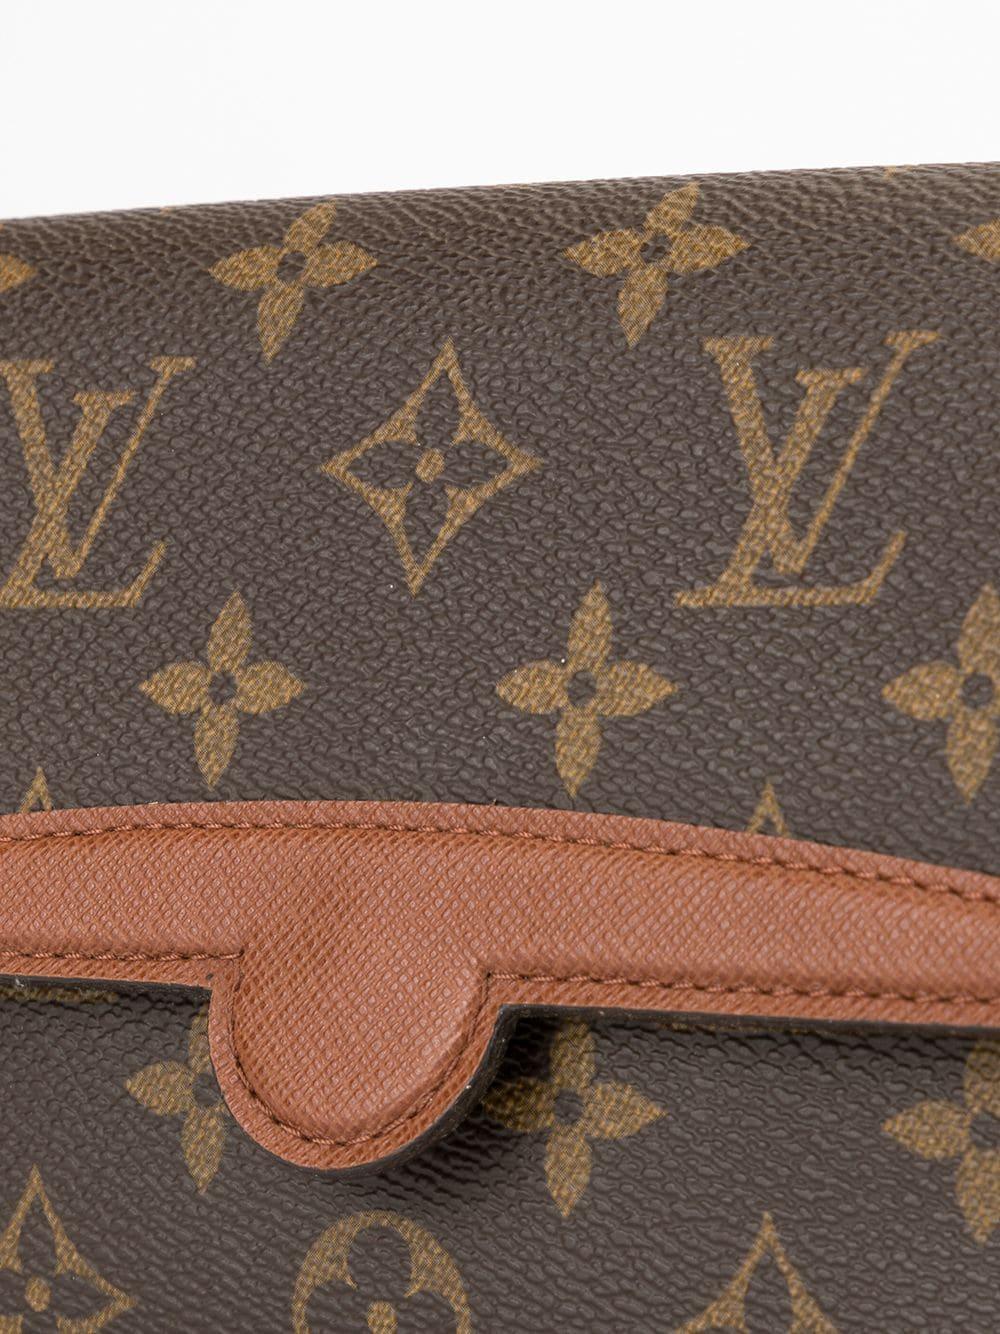 Louis Vuitton Pre-Owned Monogram Arche Belt Bag in Brown | Lyst